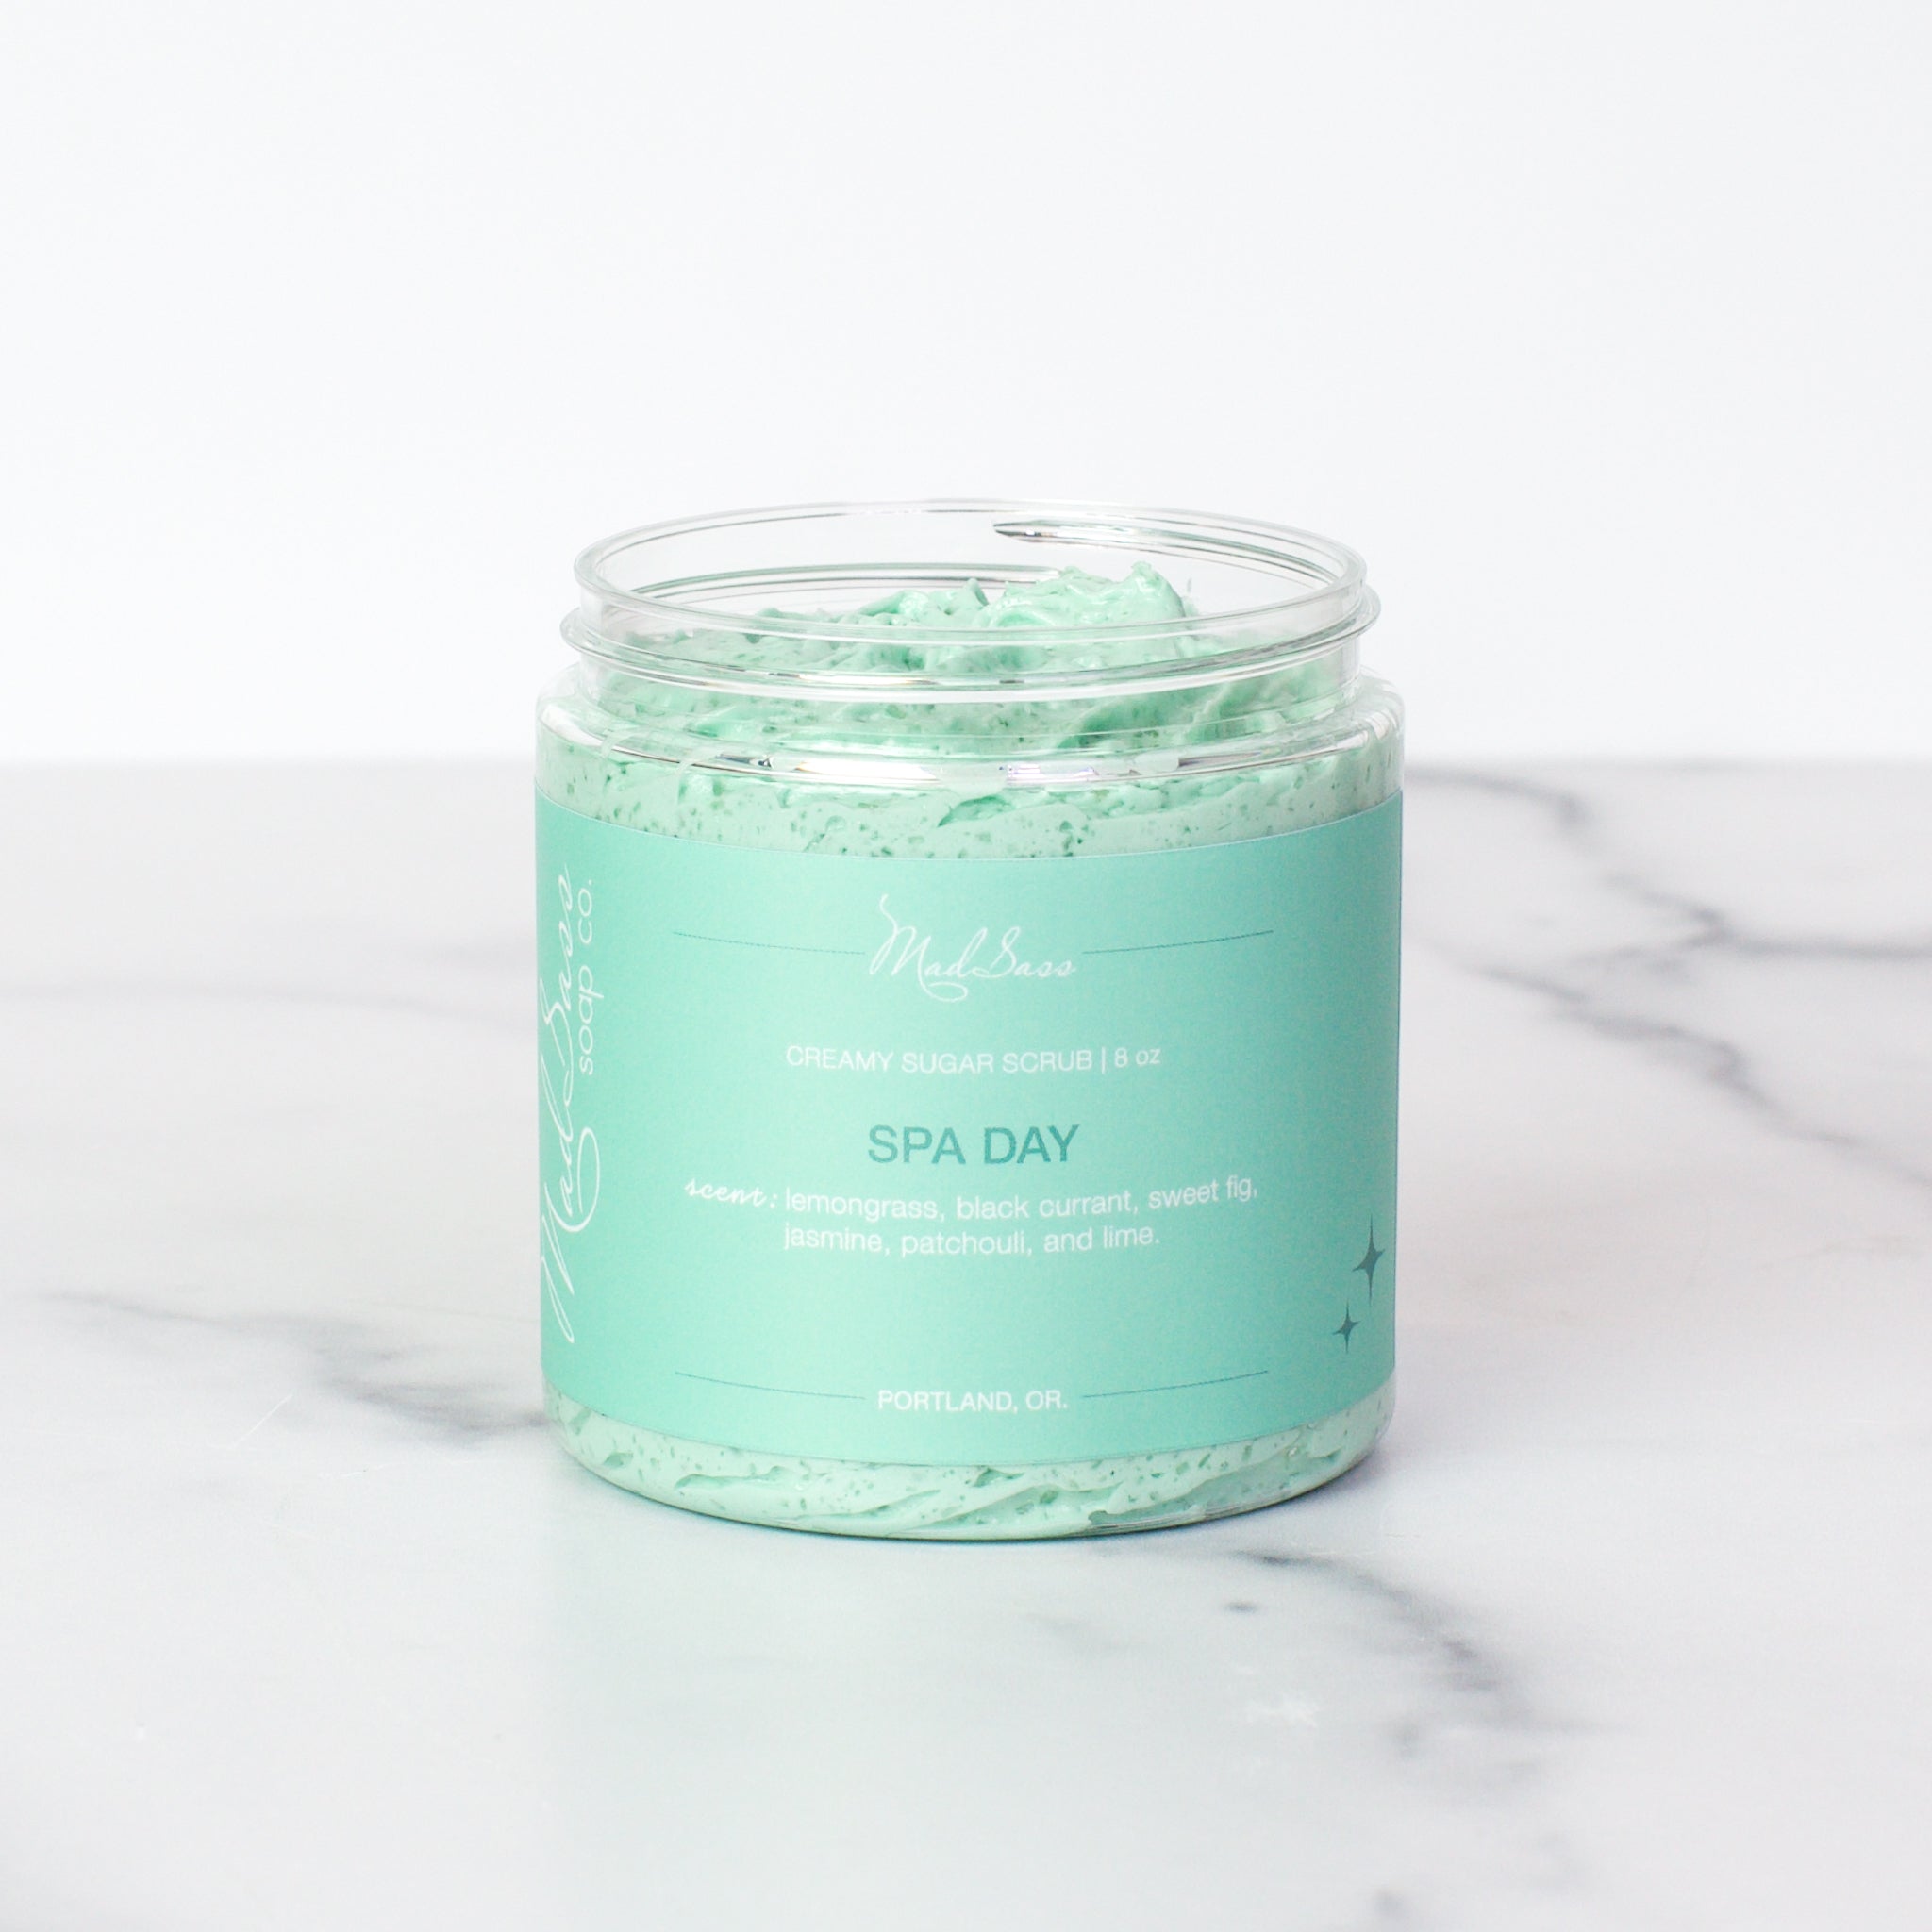 One container of Spa Day Creamy Sugar Scrubs on a white background. Spa Day is a light teal scrub in a clear tub.